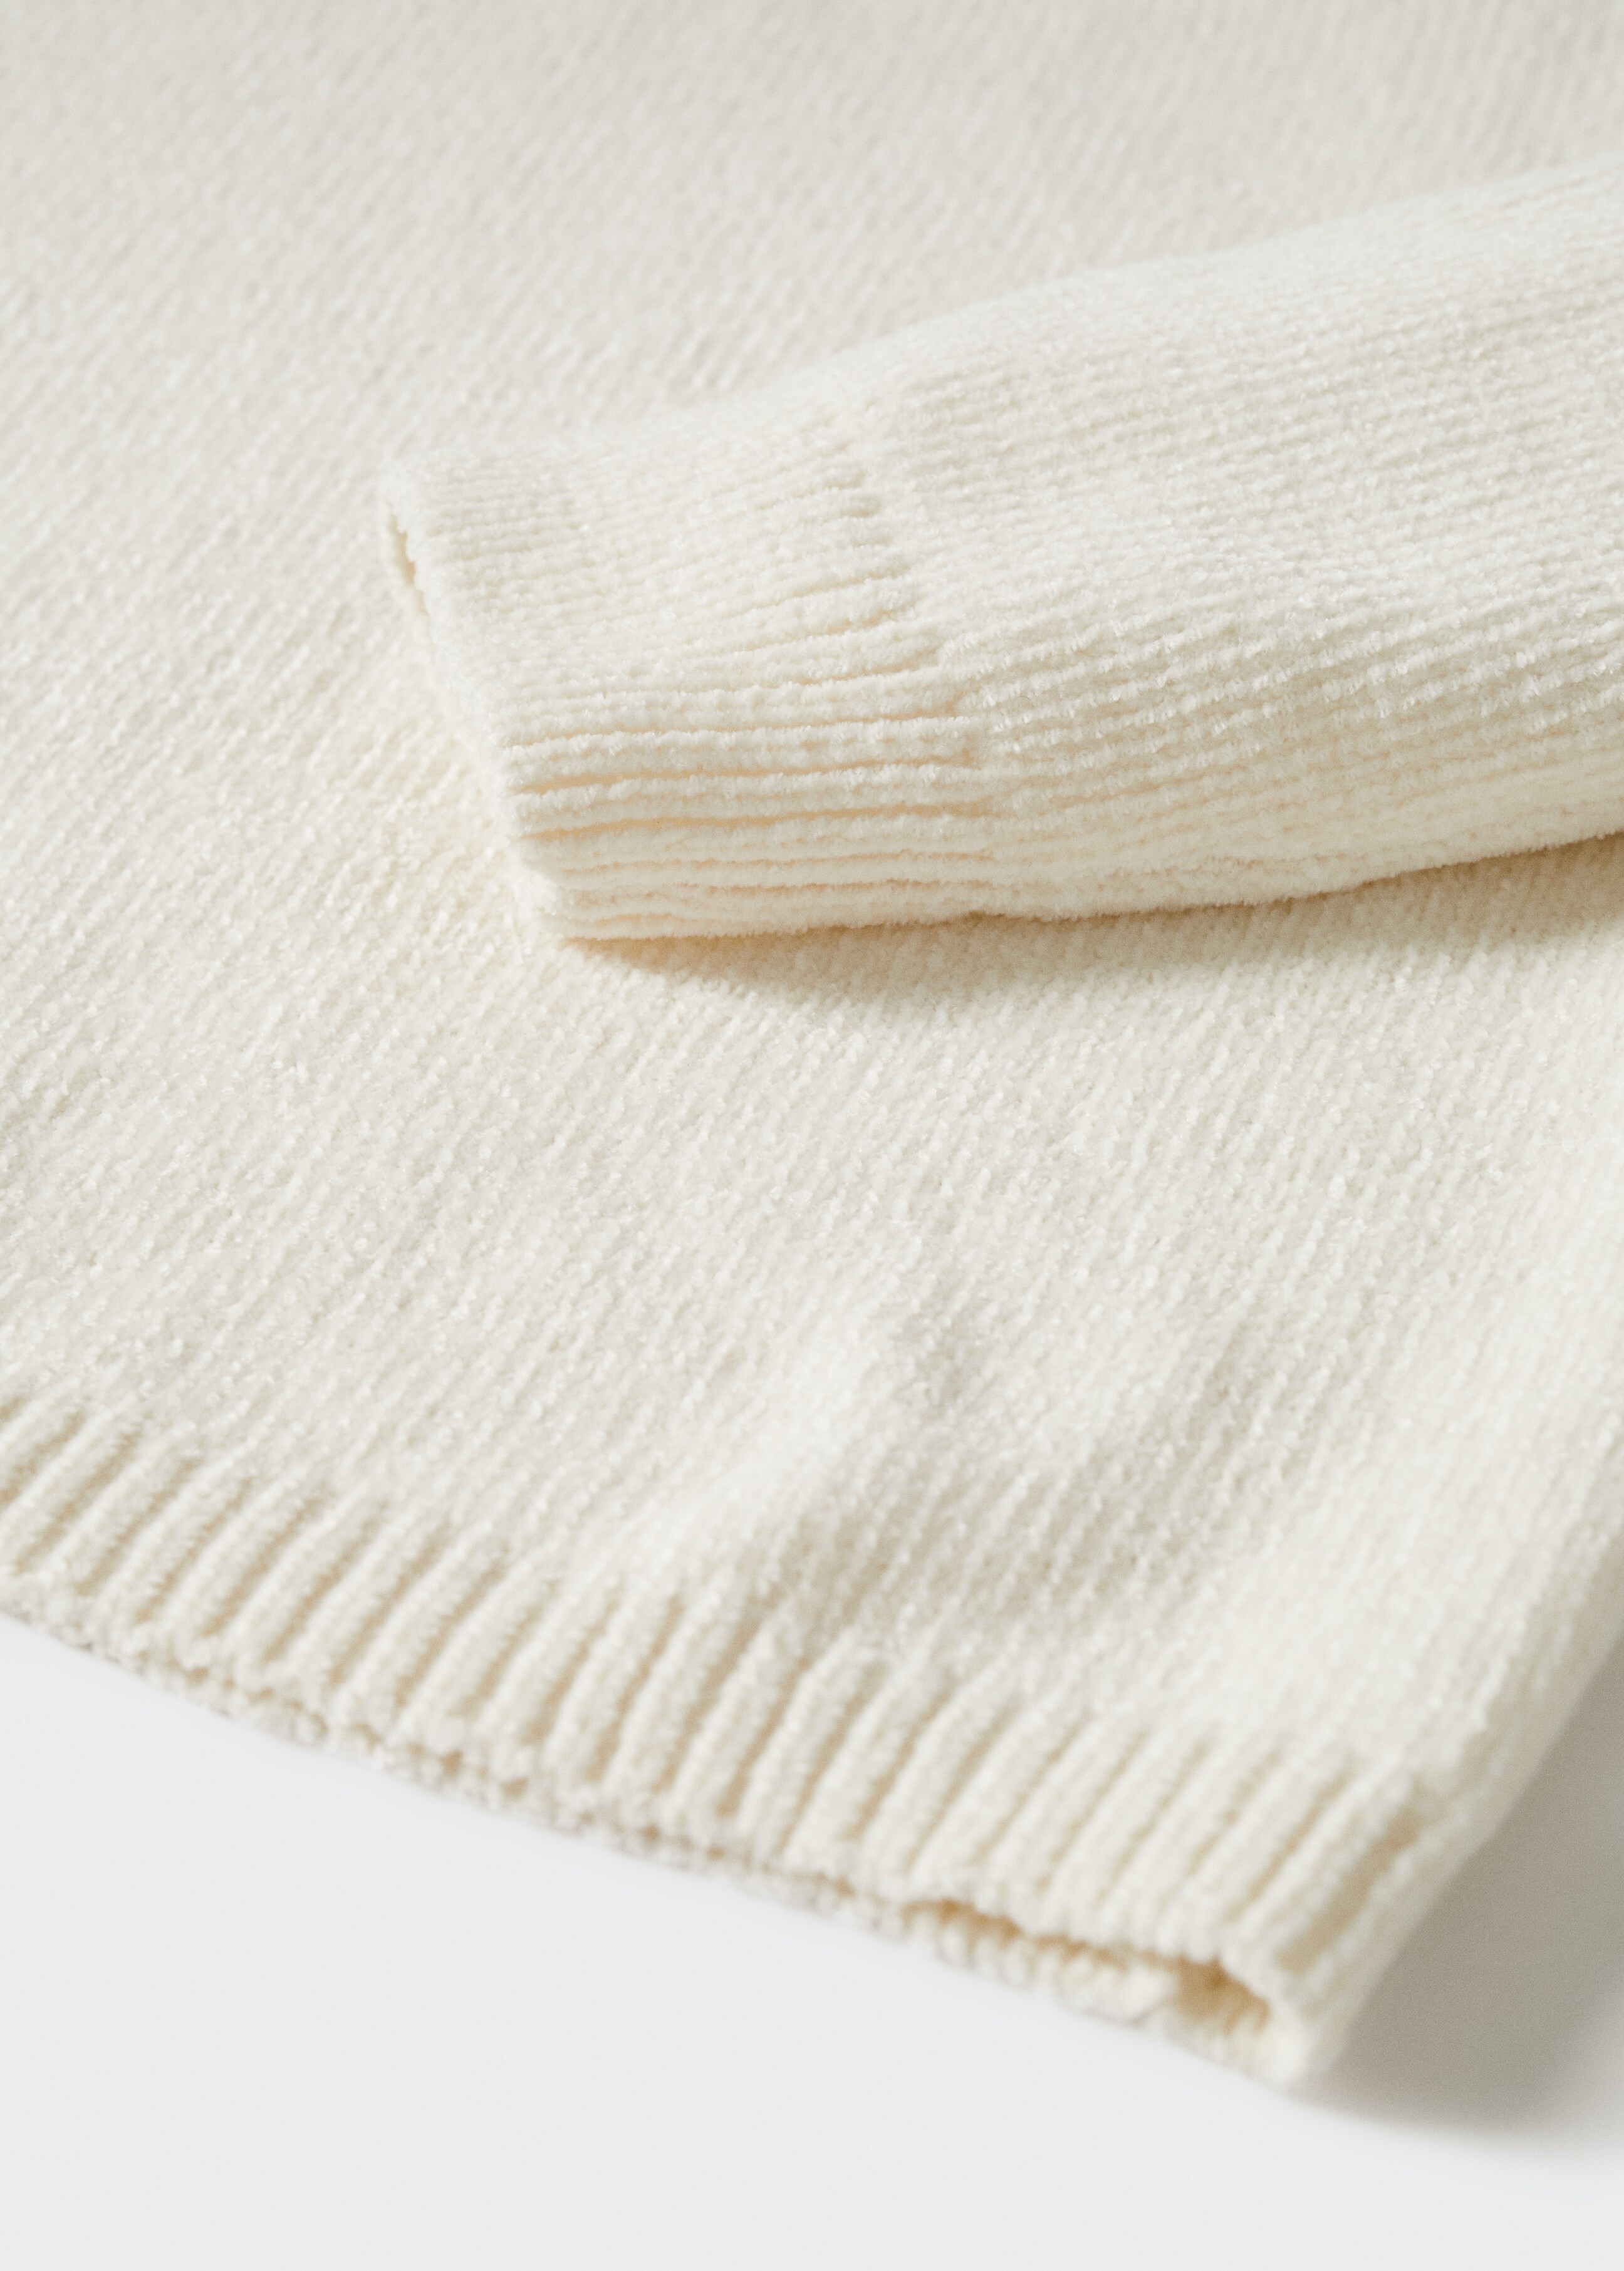 Chenille knit sweater - Details of the article 8